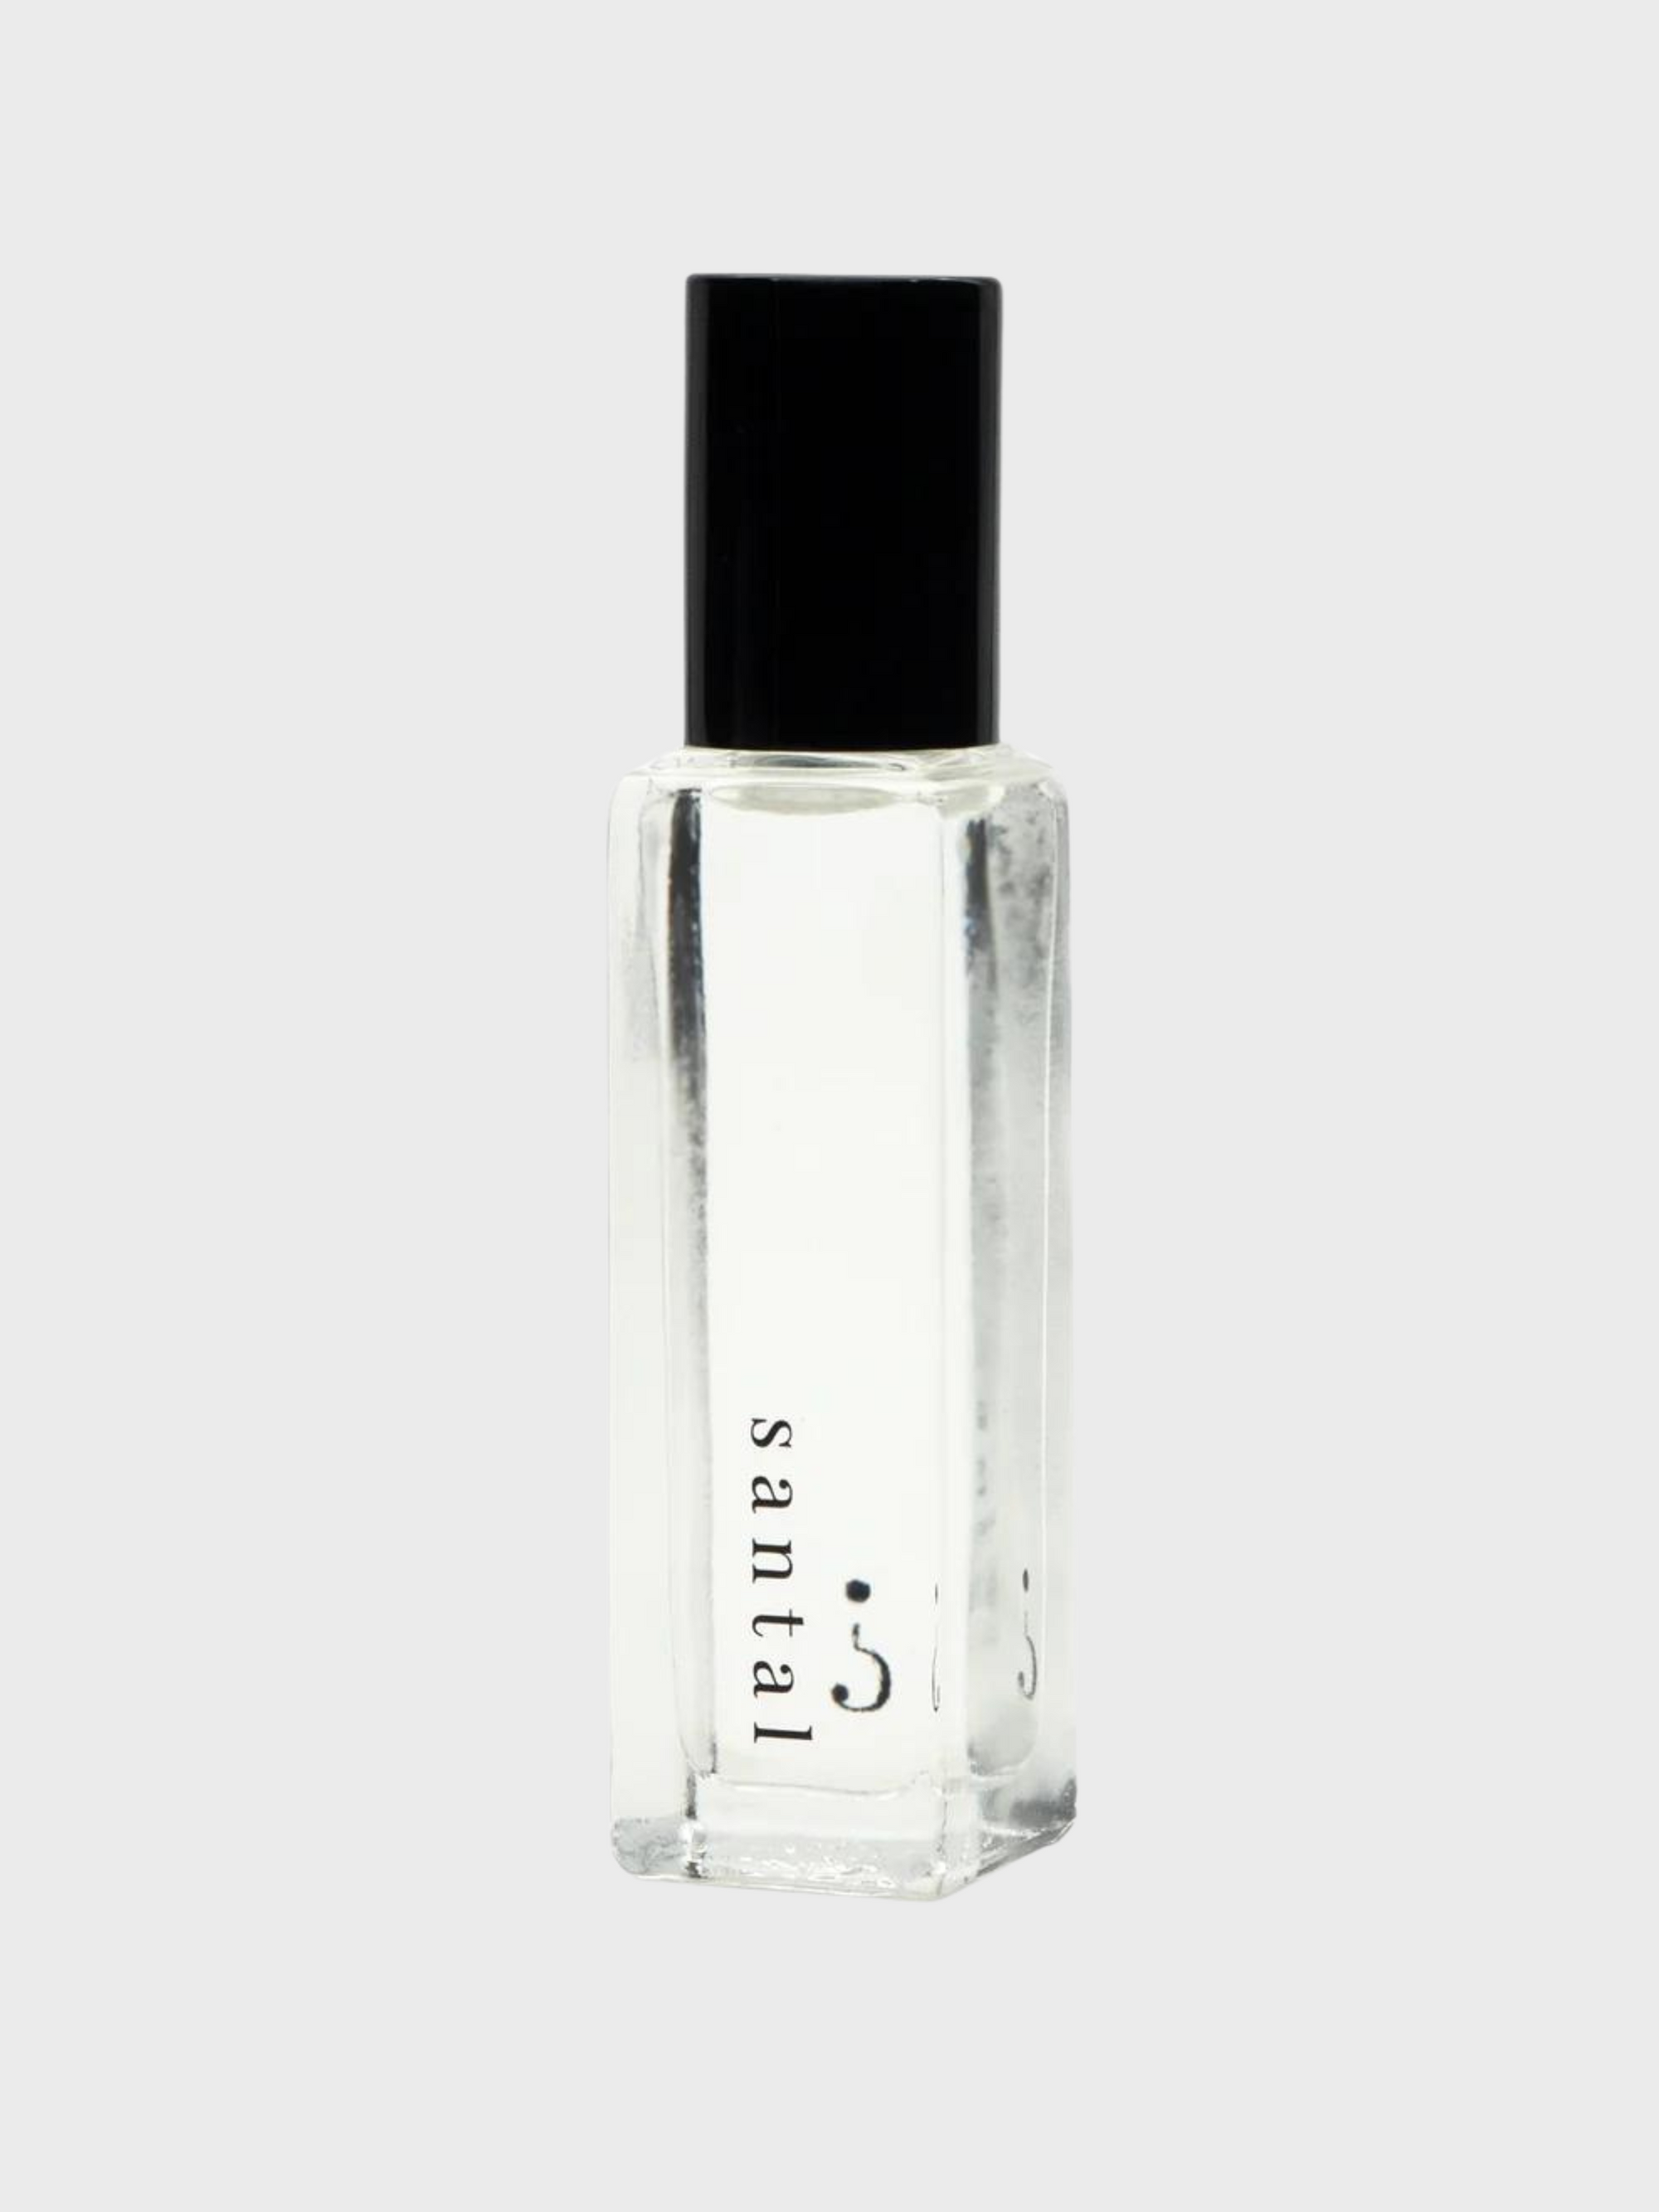 Riddle Oil Santal 20ml Roll On Fragrance-Accessories-West of Woodward Boutique-Vancouver-Canada